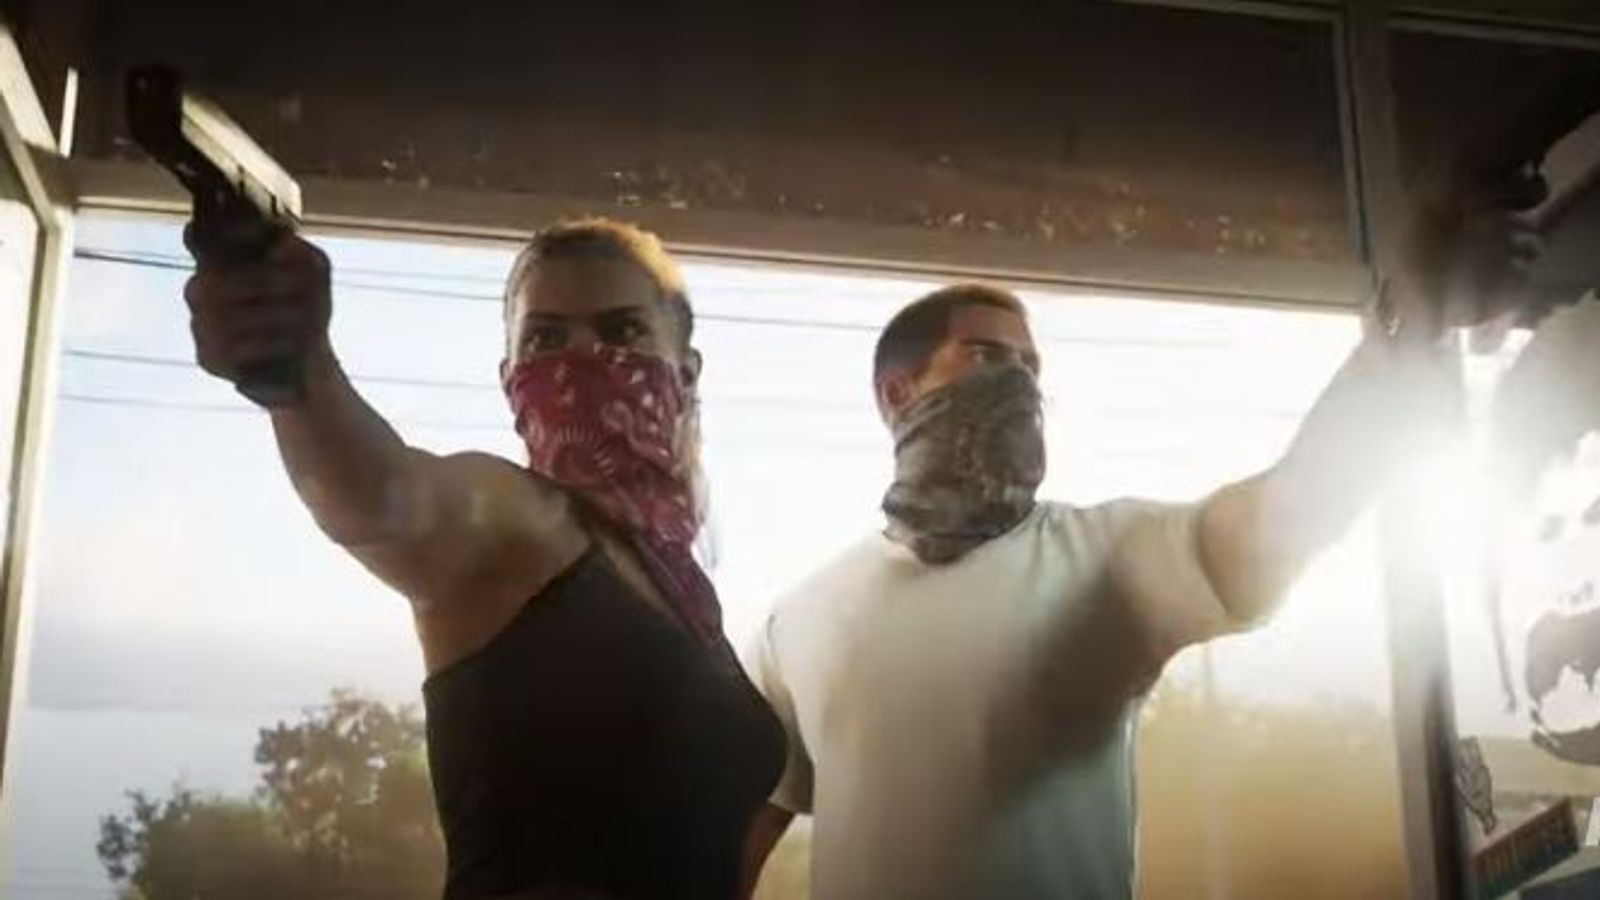 Grand Theft Auto VI: First trailer released early by Rockstar Games after leak